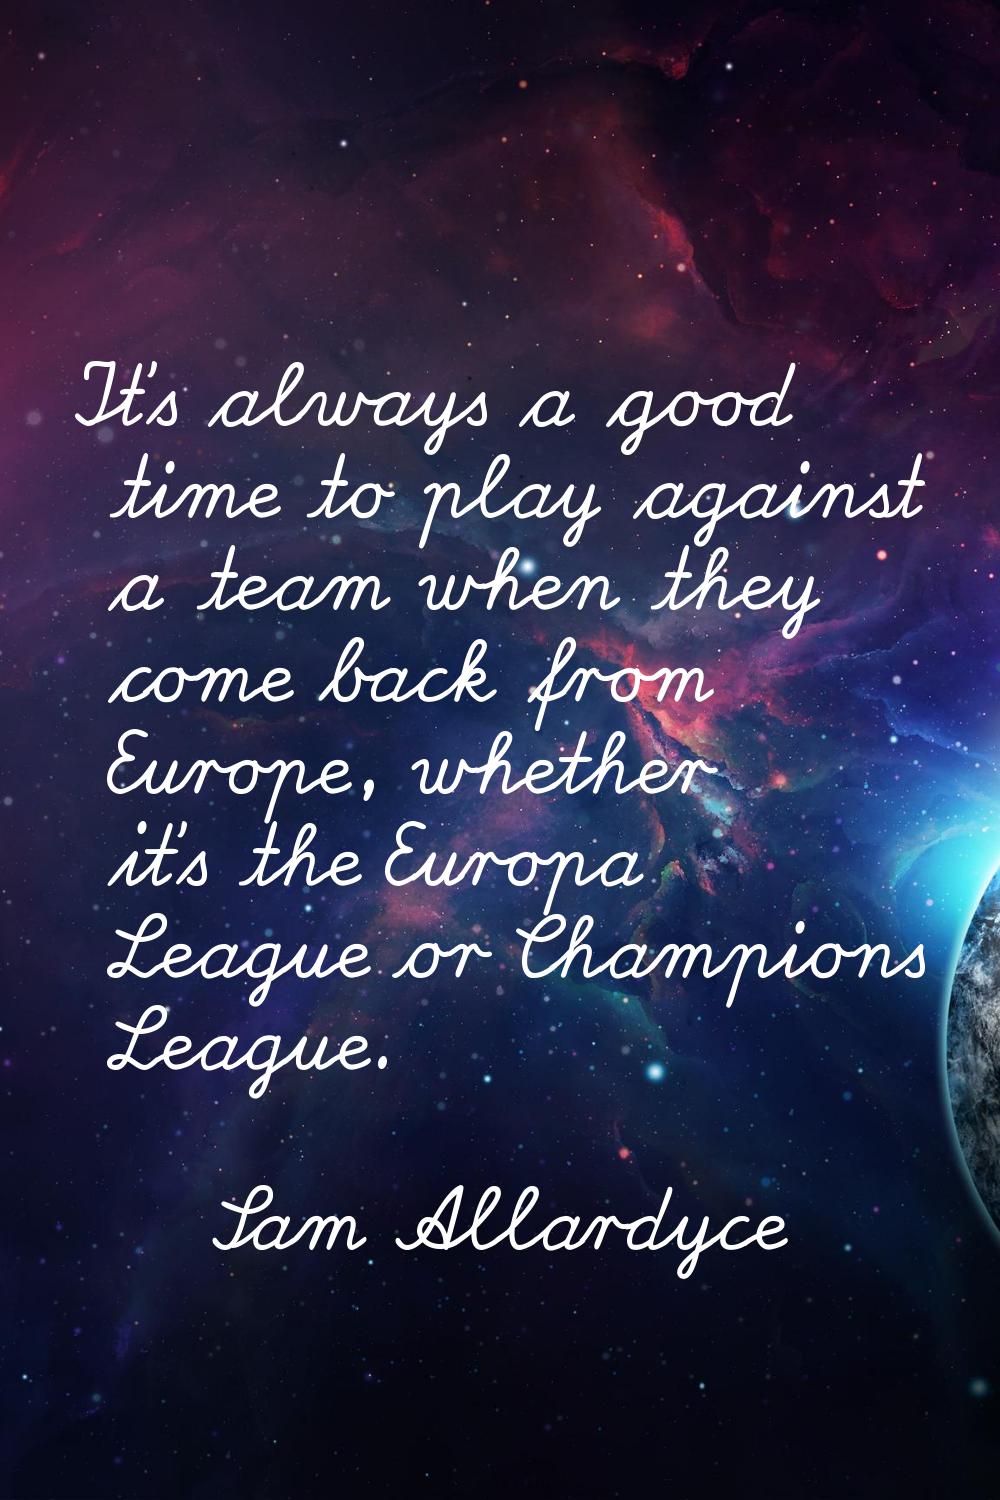 It's always a good time to play against a team when they come back from Europe, whether it's the Eu